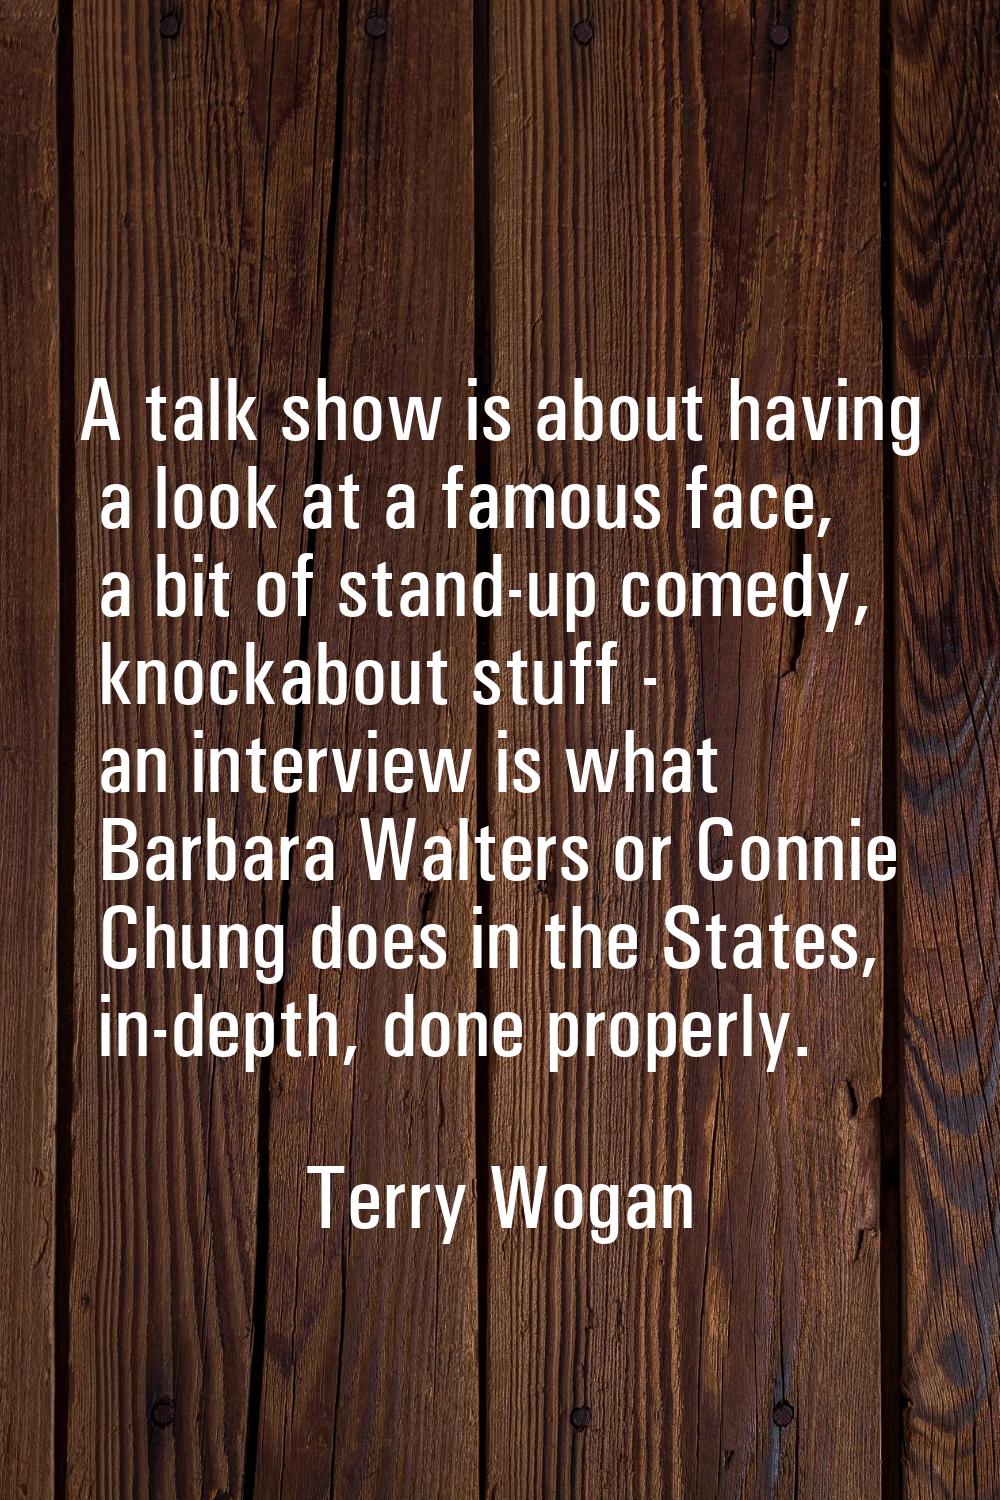 A talk show is about having a look at a famous face, a bit of stand-up comedy, knockabout stuff - a